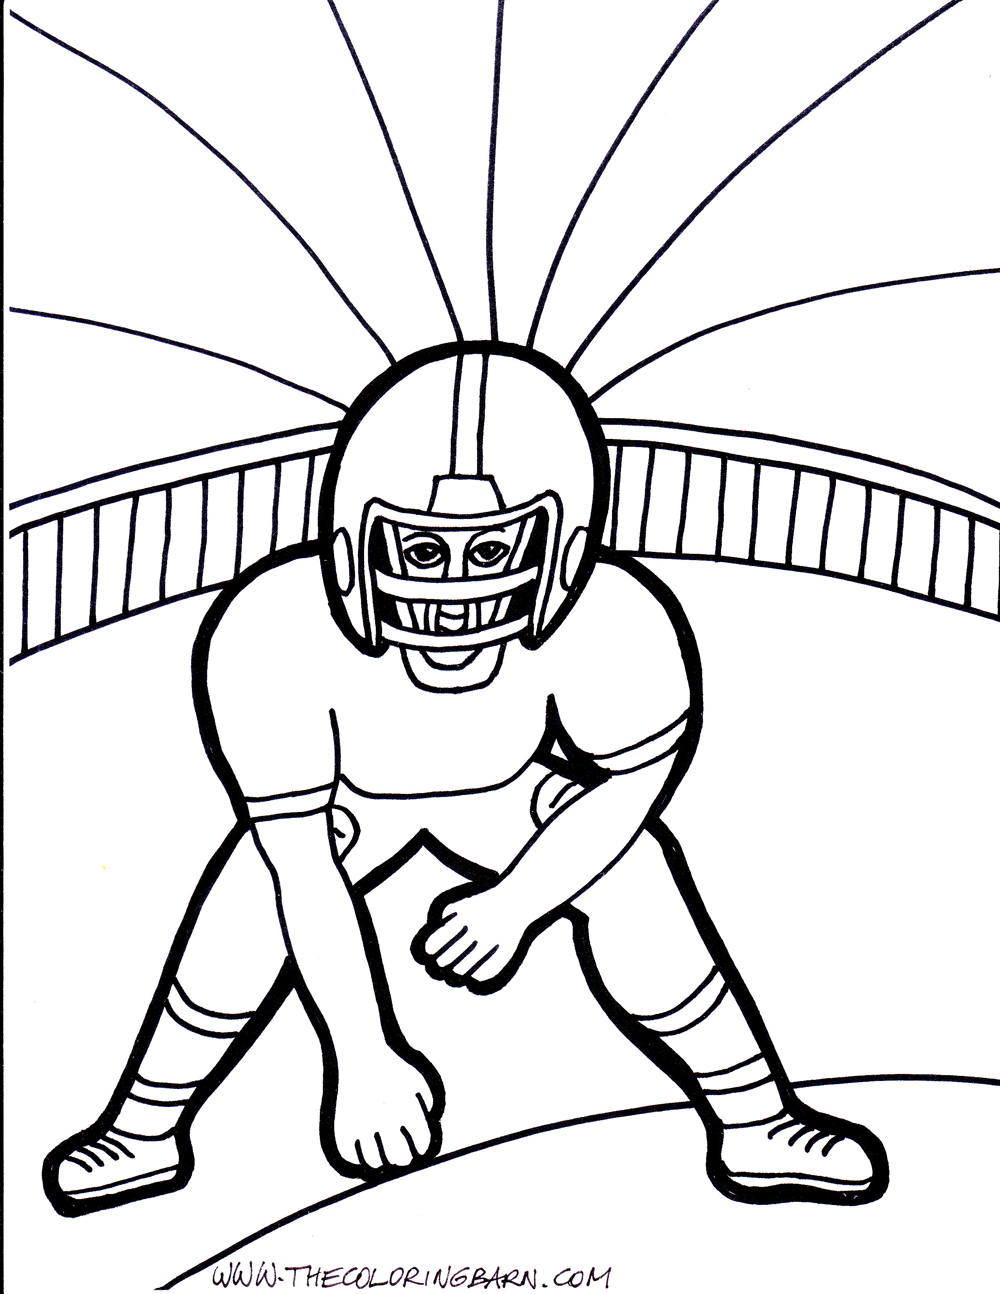 Football Coloring Pages Free Printable